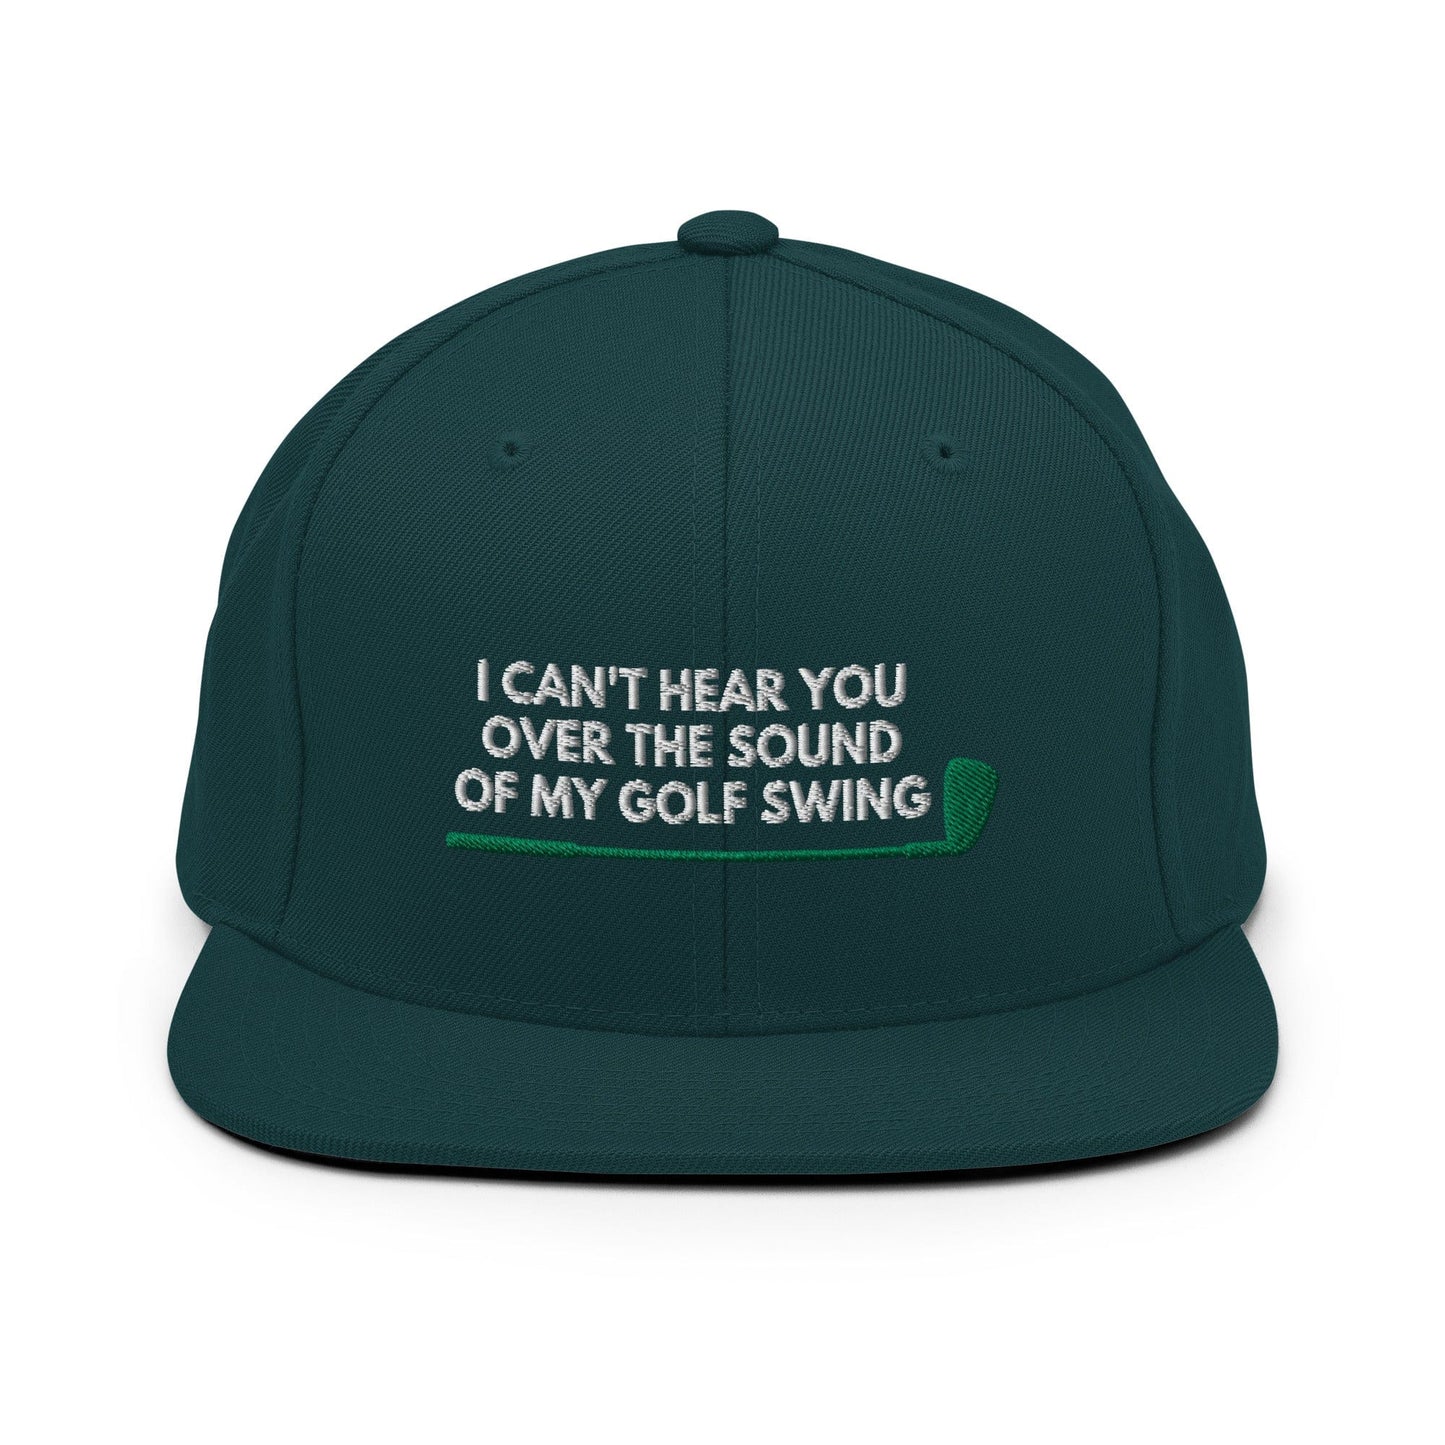 Funny Golfer Gifts  Snapback Hat Spruce I Cant Hear You Over The Sound Of My Golf Swing Hat Snapback Hat